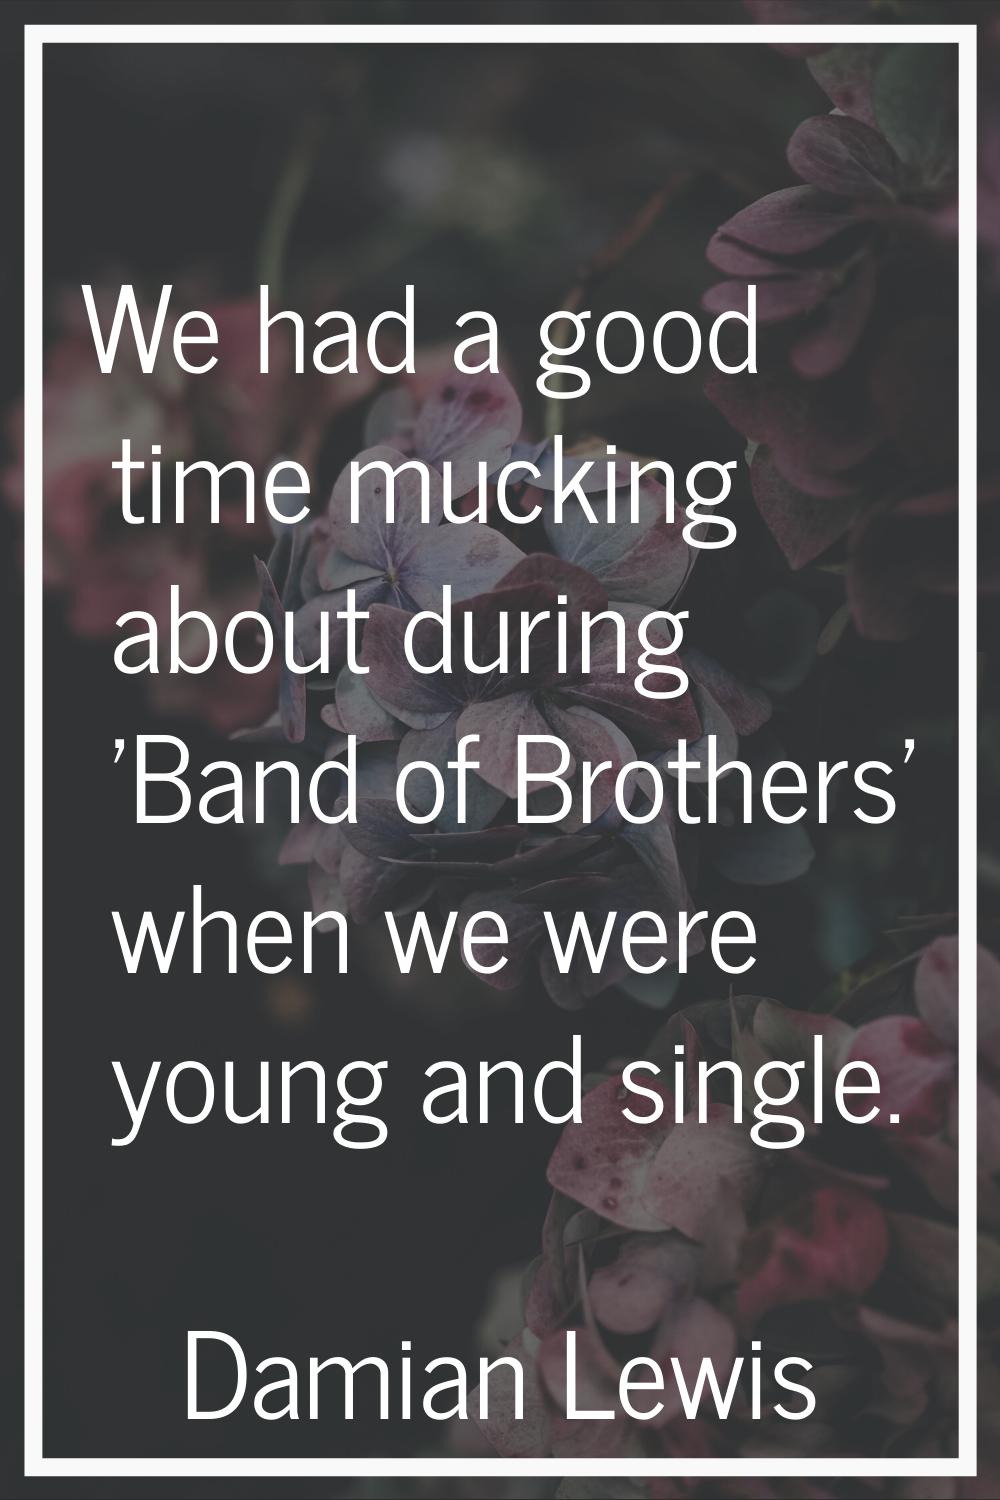 We had a good time mucking about during 'Band of Brothers' when we were young and single.